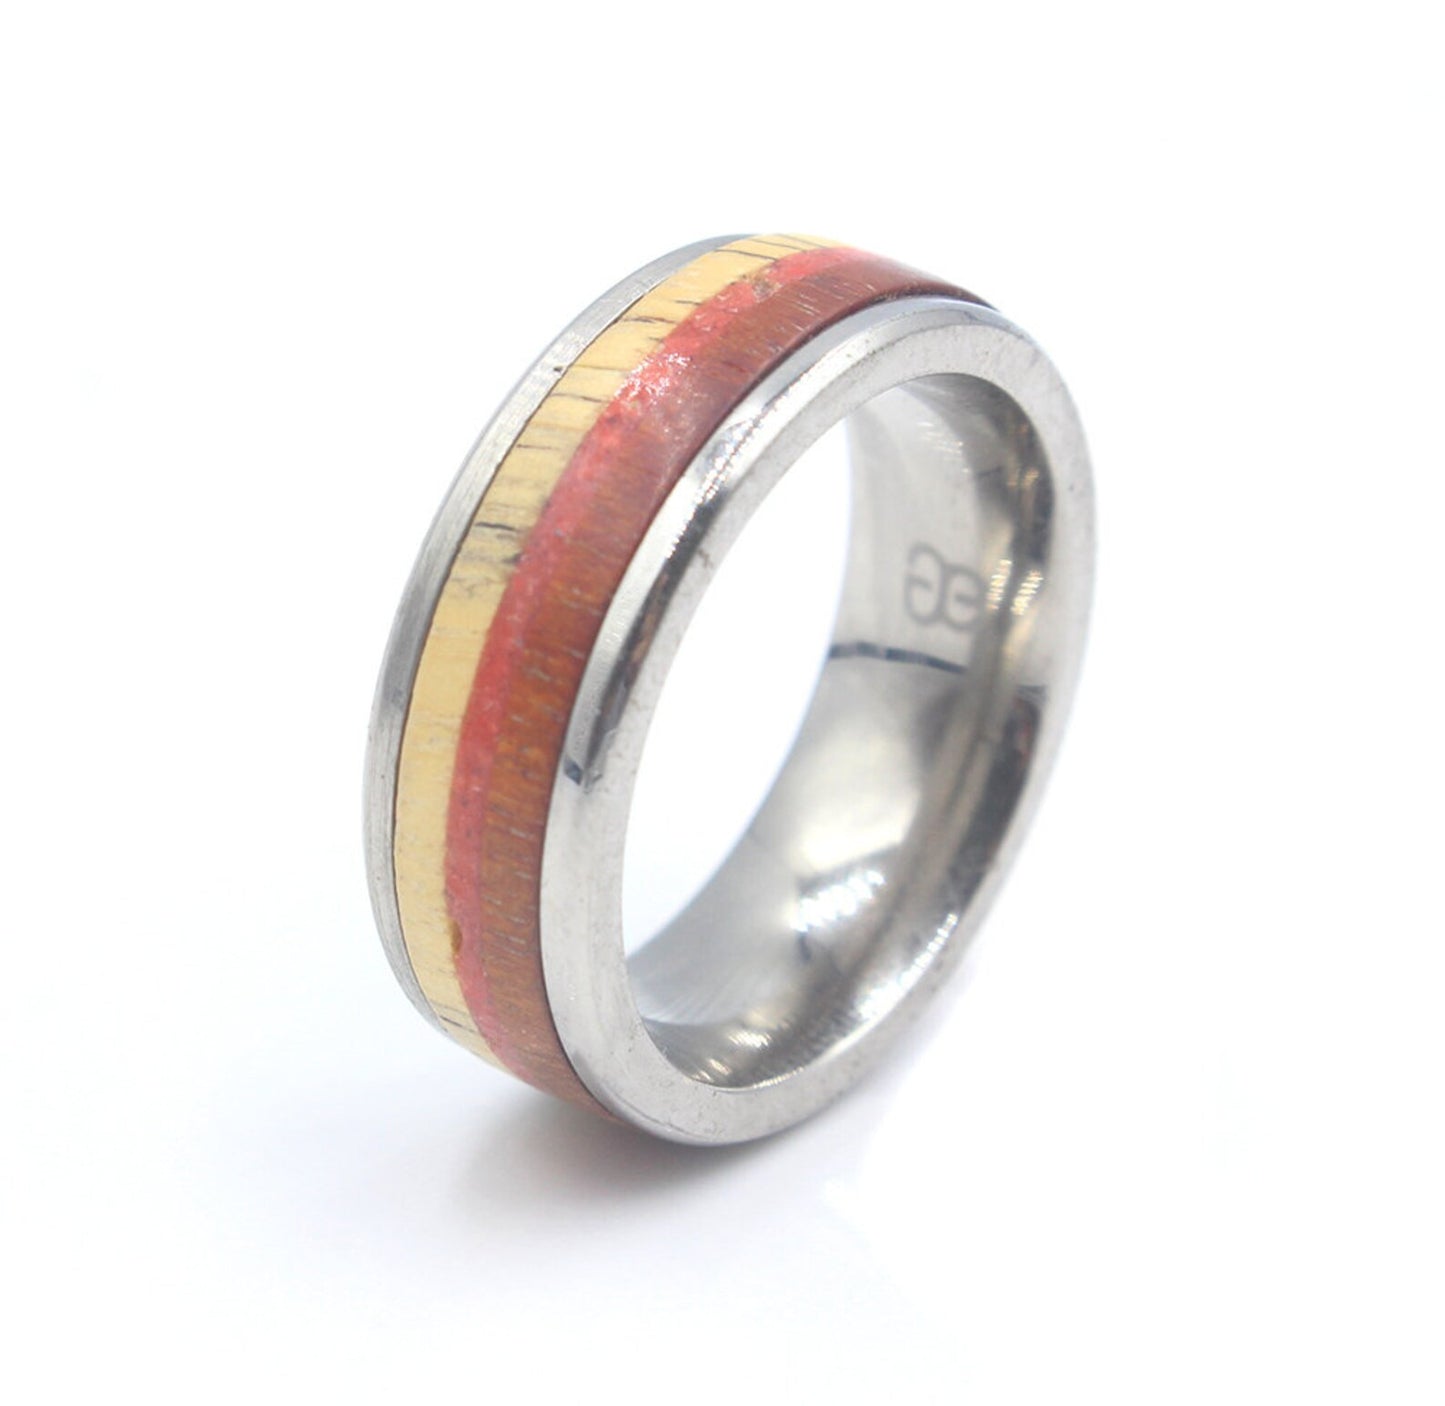 Red Jasper Stone, Rosewood, and Spalted Tamarind Wood Ring